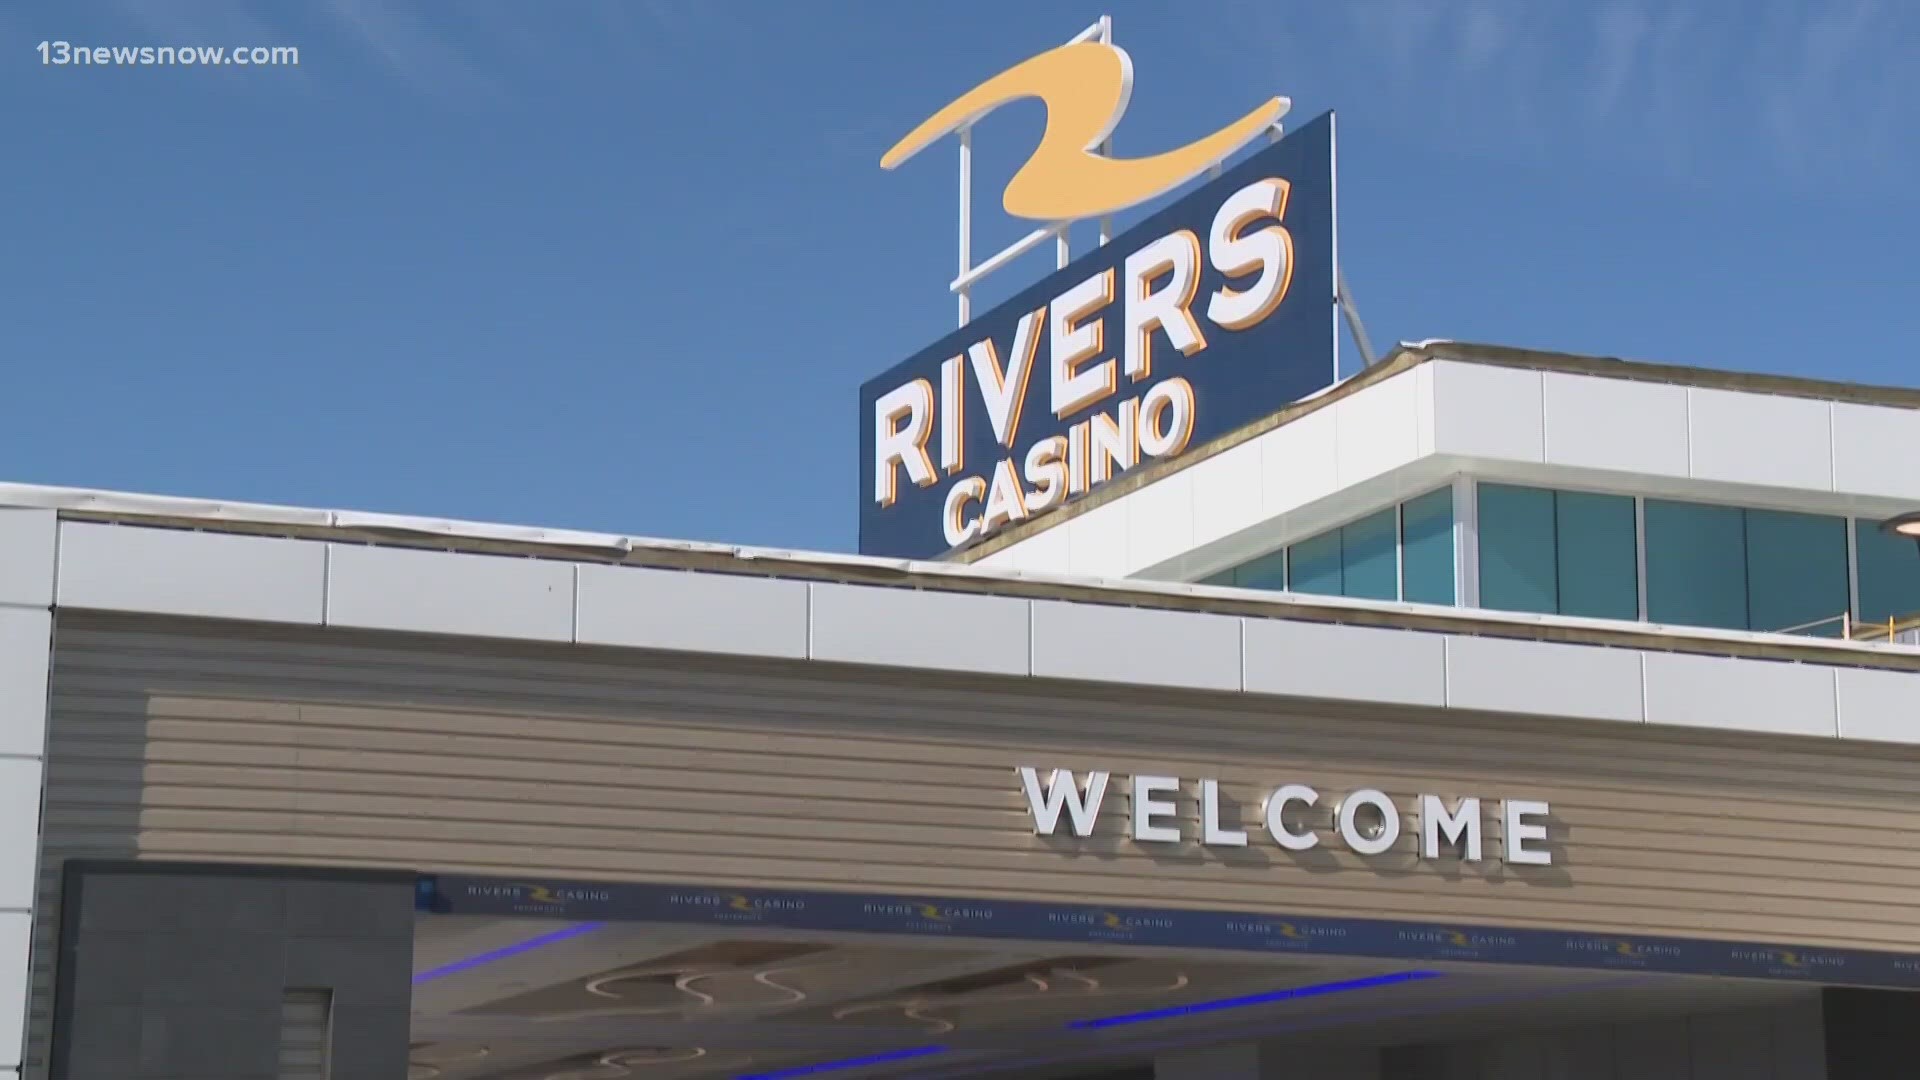 rivers casino portsmouth free drinks